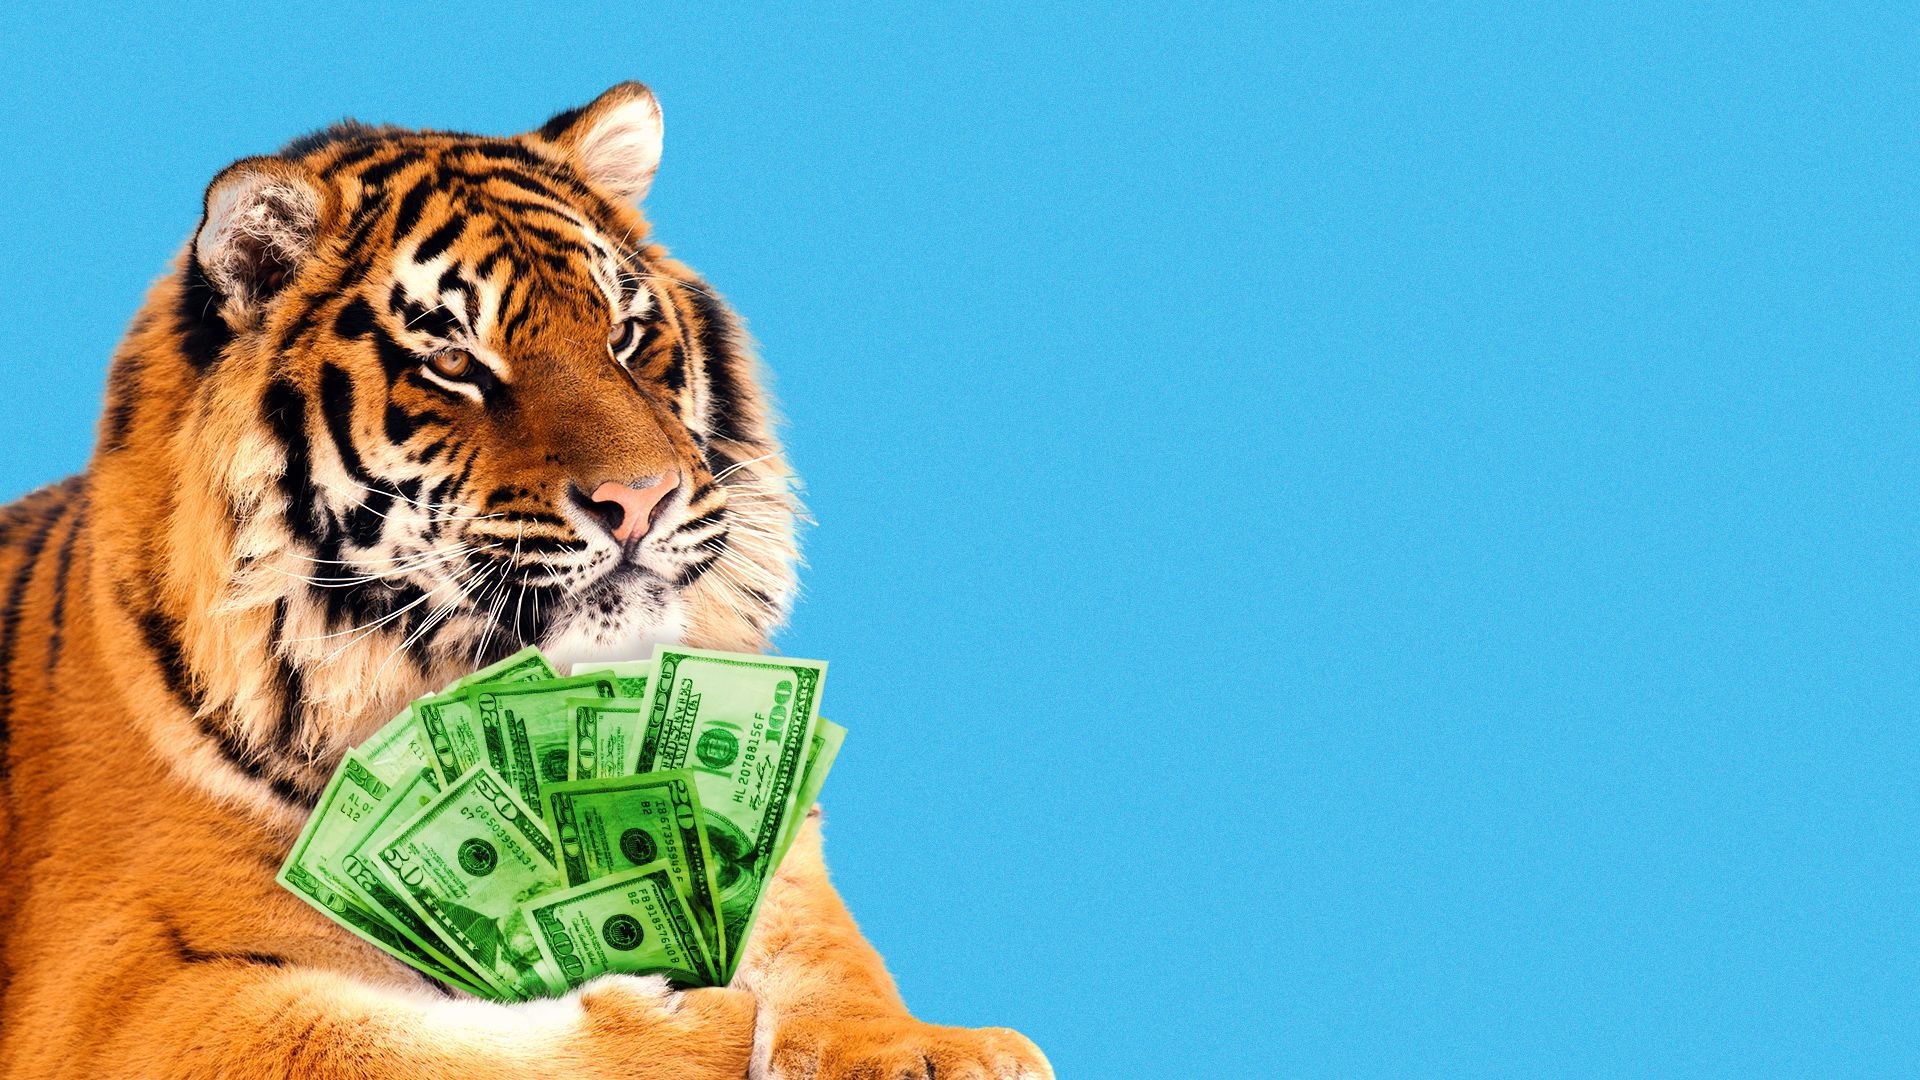 Illustration of a tiger holding a fan of cash in its paw.